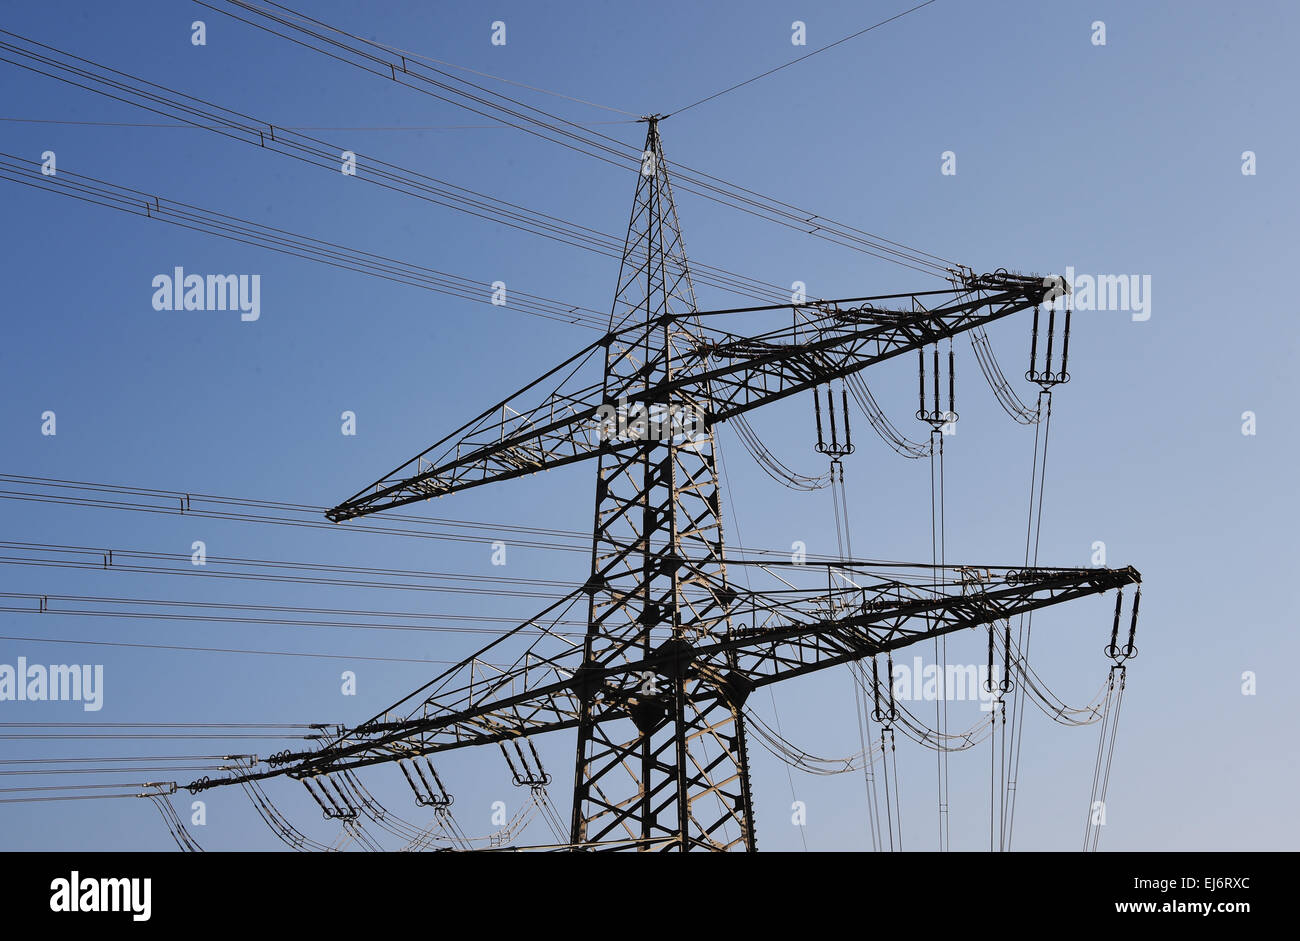 Karlsruhe, Germany. 20th Mar, 2015. ILLUSTRATION - A pylon in Karlsruhe, Germany, 20 March 2015. On Monday 23 March 2015 TransnetBW will hold a press conference in Altlussheim on the 'Netzausbauprojekt ULTRANET' network expansion project. Ultranet constitutes the southern section of one of the planned 'Gleichstrom-Autobahnen' (Direct Current Highways) from northern Germany to the south. TransnetBW manages the transmission network in the federal state of Baden Wuertemberg. Photo: Uli Deck/dpa/Alamy Live News Stock Photo